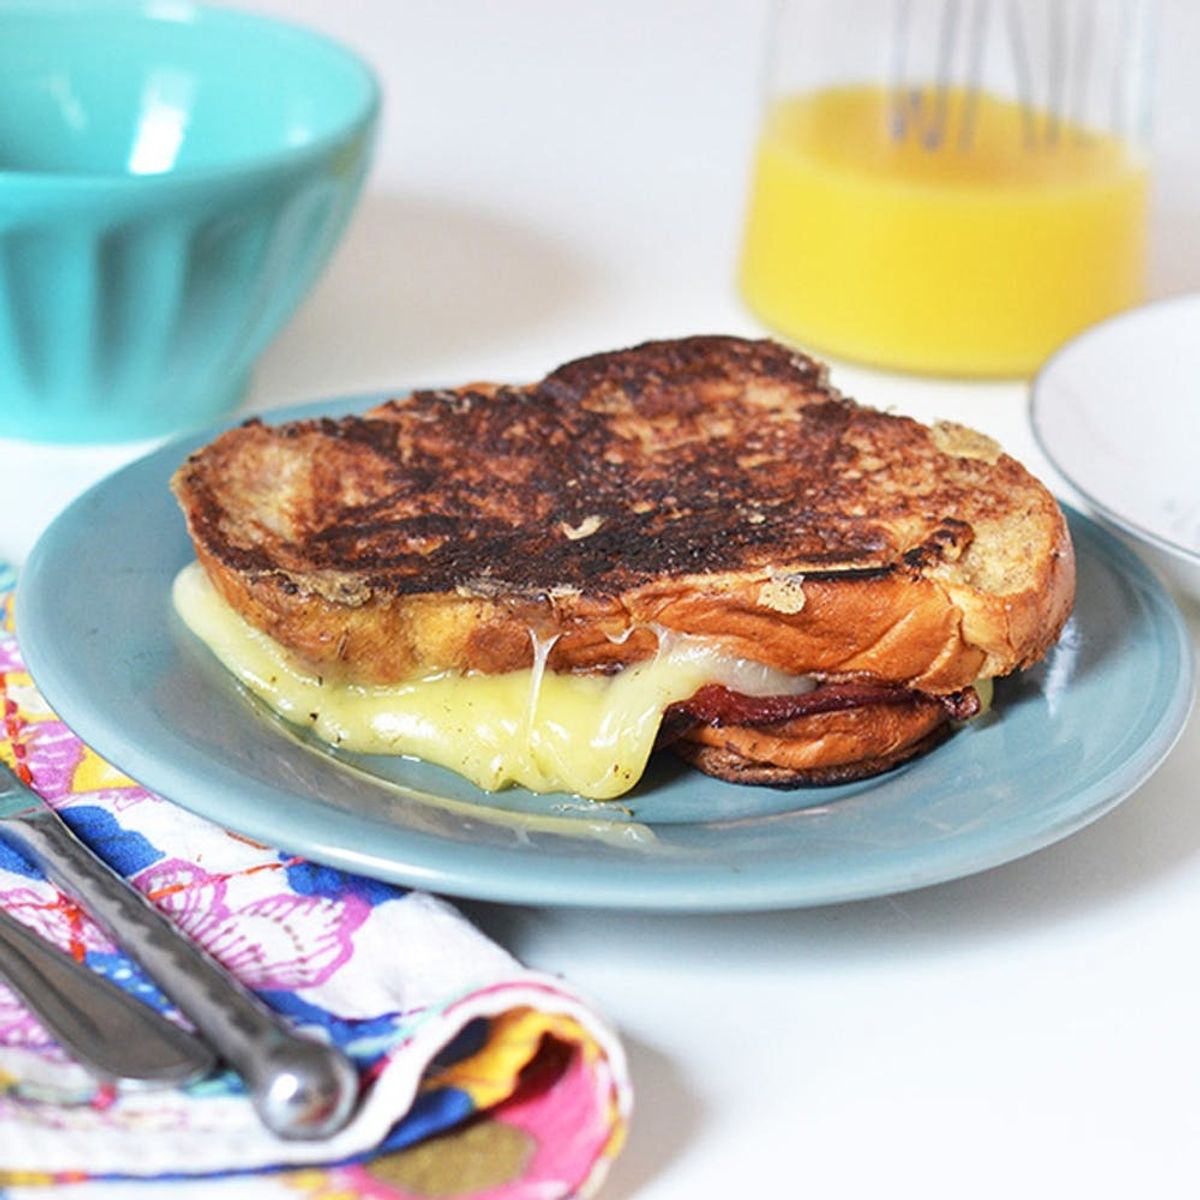 You’ll Want to Save This Crazy Grilled Cheese Recipe for Brunch